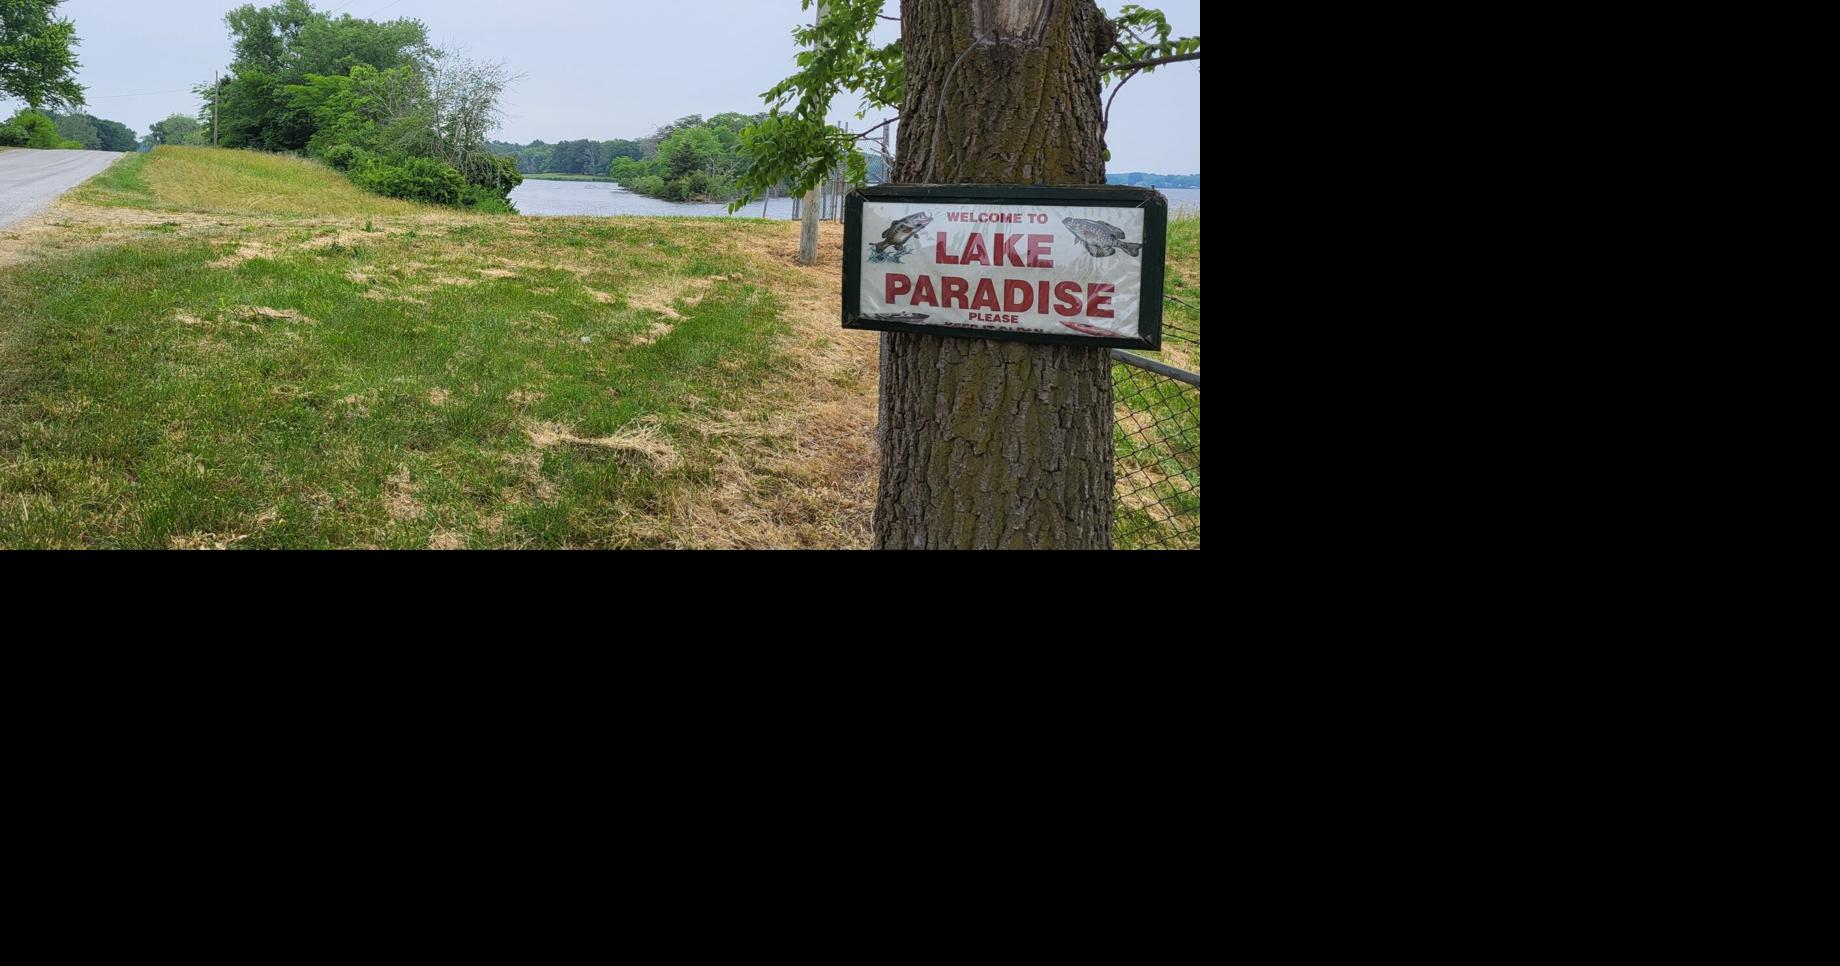 Mattoon council to consider hosting AmeriCorps workers for Lake Paradise trail construction